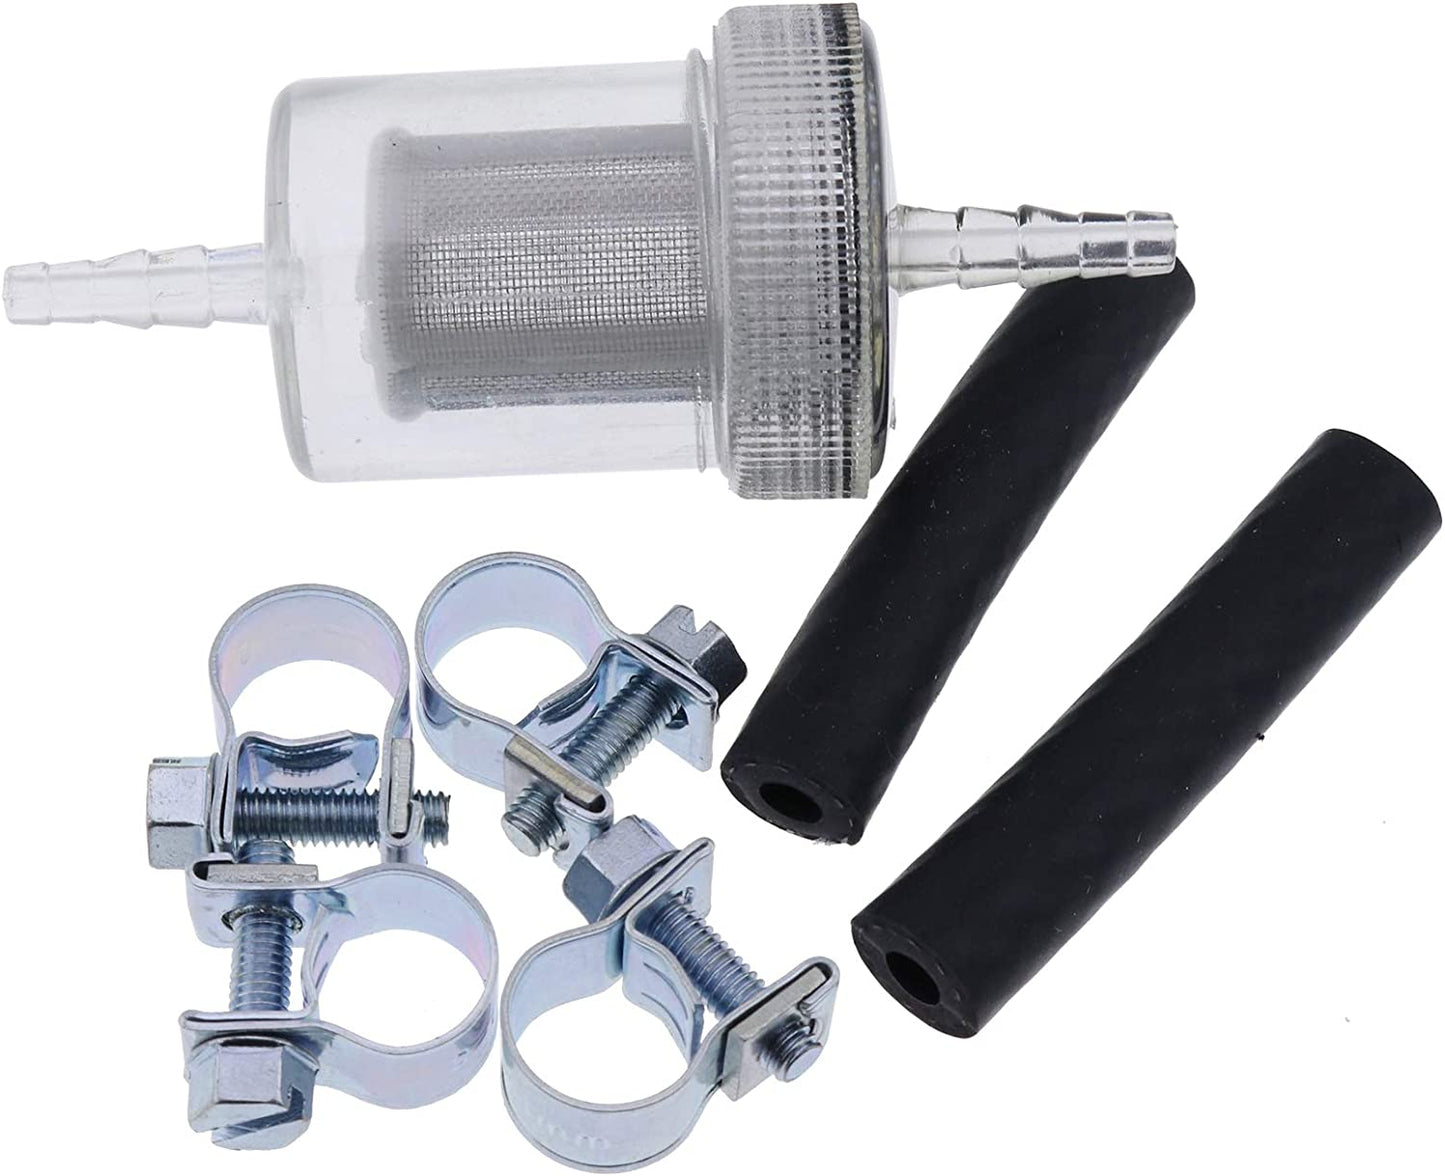 New 5mm Plastic In-line Fuel Filter Kit Compatible with Webasto Eberspacher